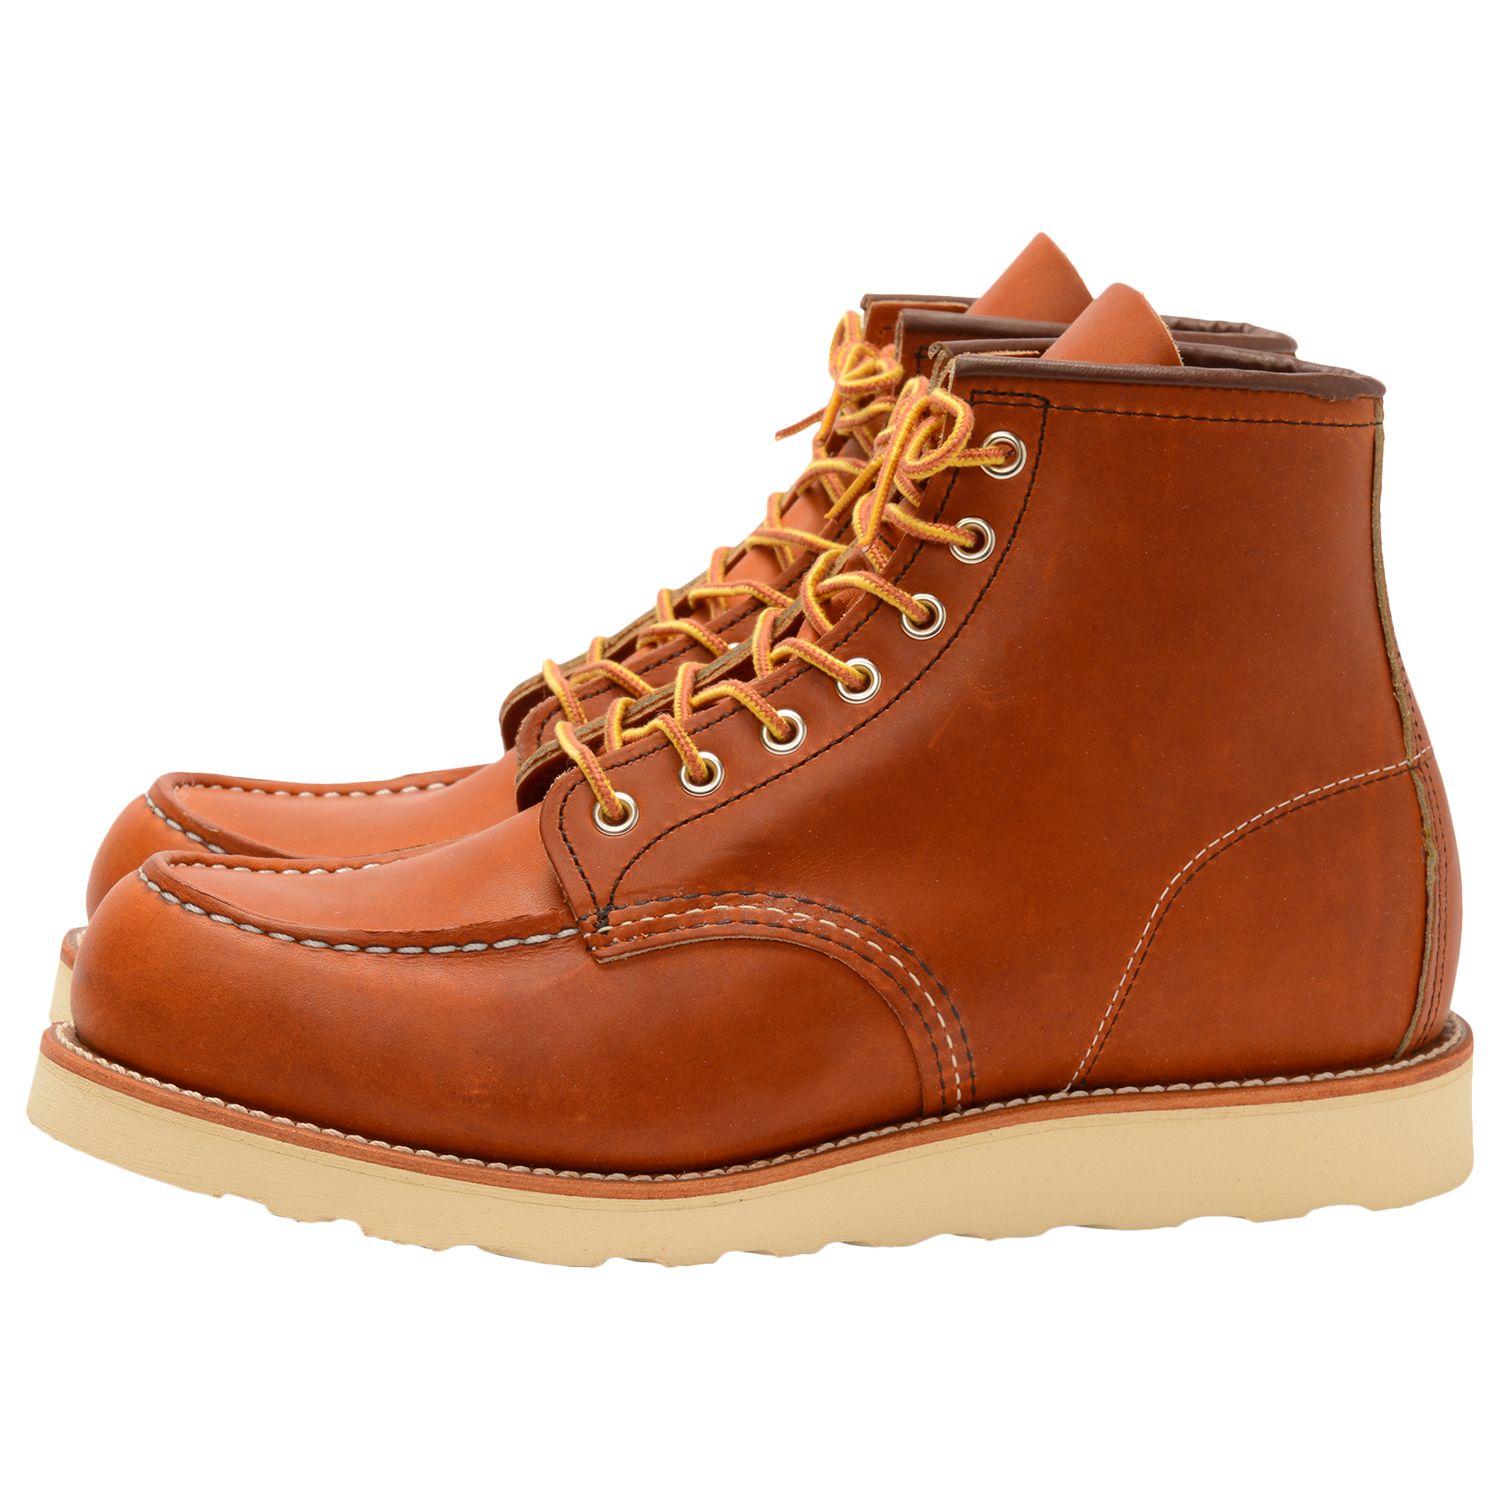 Red Wing 875 Moc Toe Boot, Oro Legacy, 7